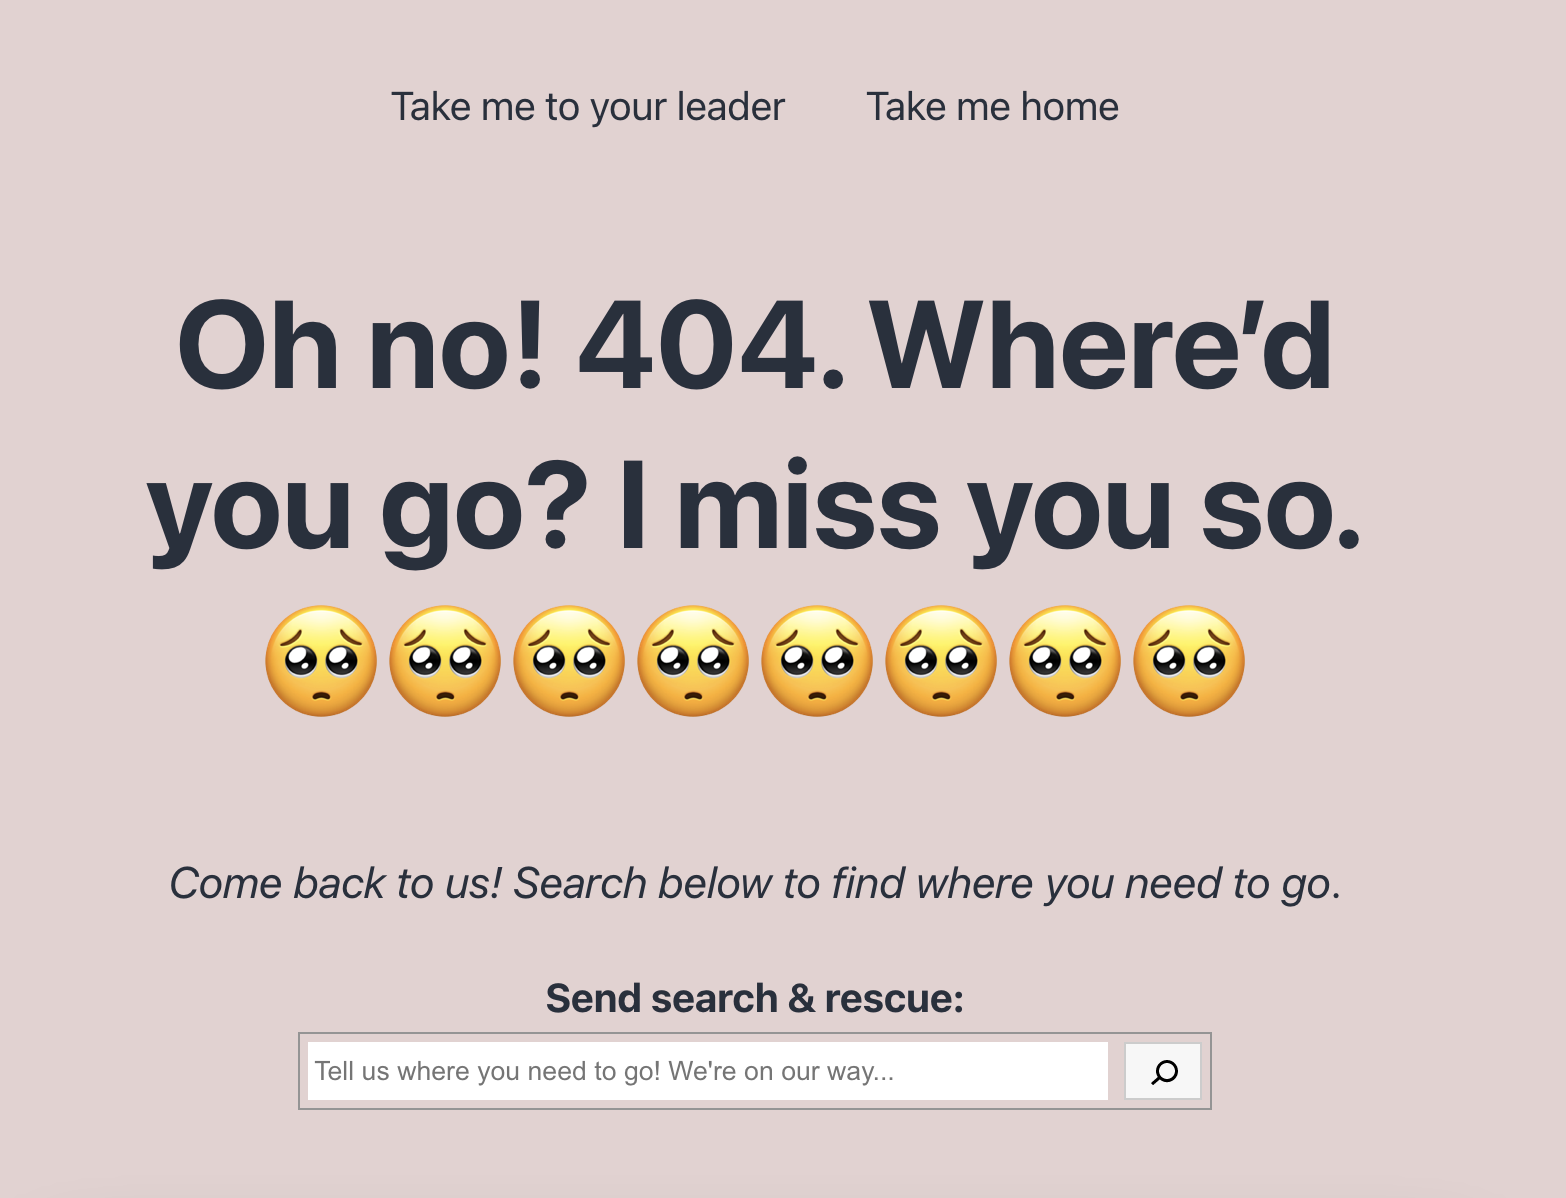 Image showing a silly 404 page that says, "Oh no! 404. Where'd you go? I miss you so" with some additional emojis and a search field.